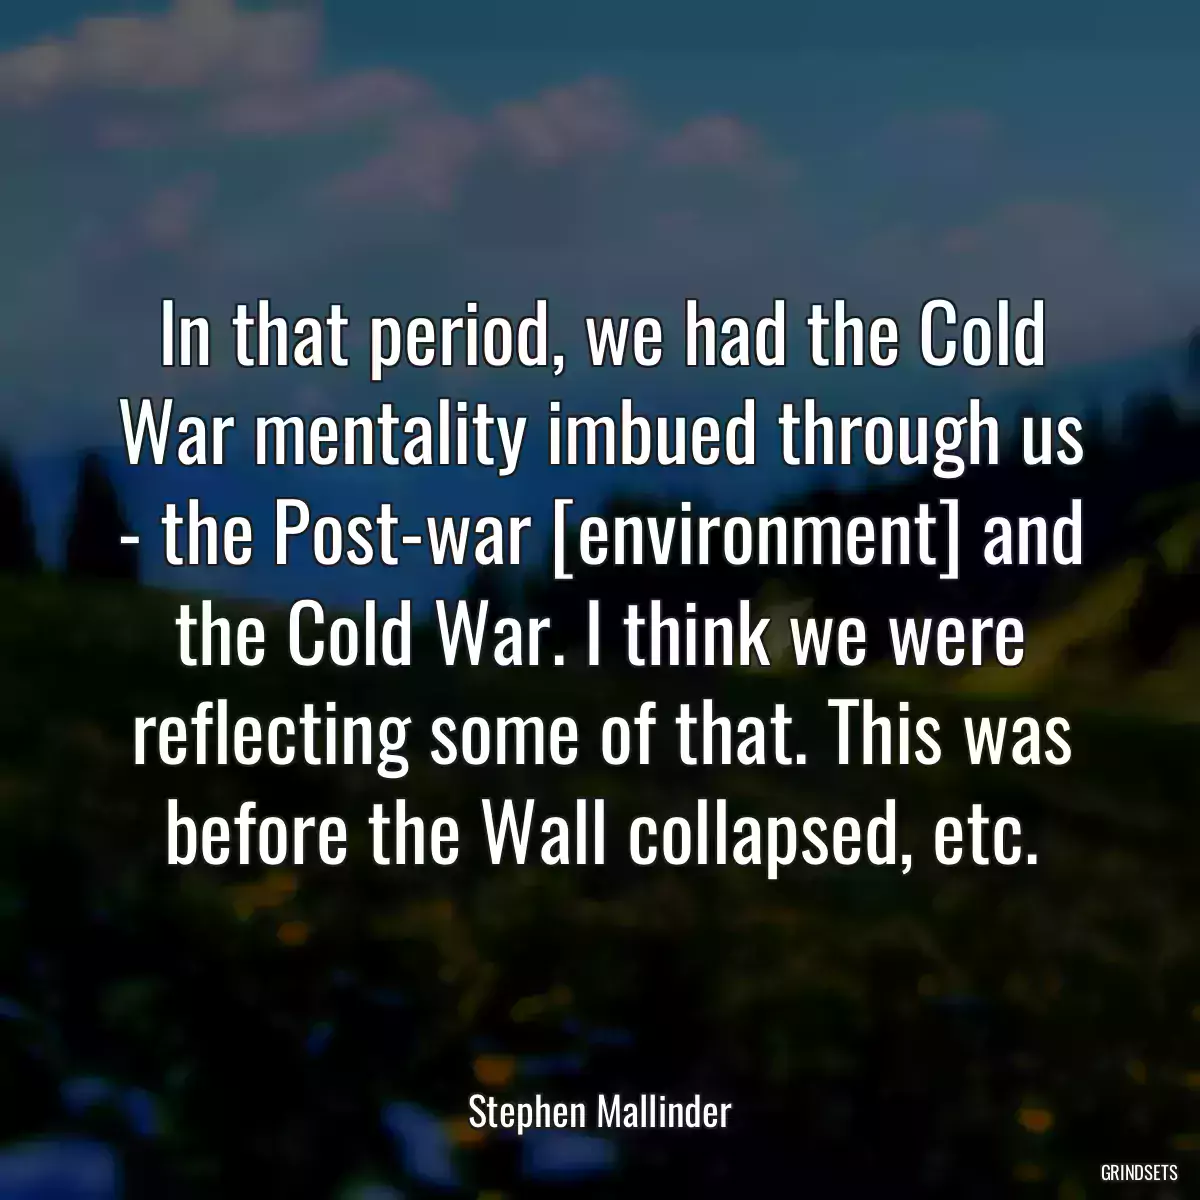 In that period, we had the Cold War mentality imbued through us - the Post-war [environment] and the Cold War. I think we were reflecting some of that. This was before the Wall collapsed, etc.